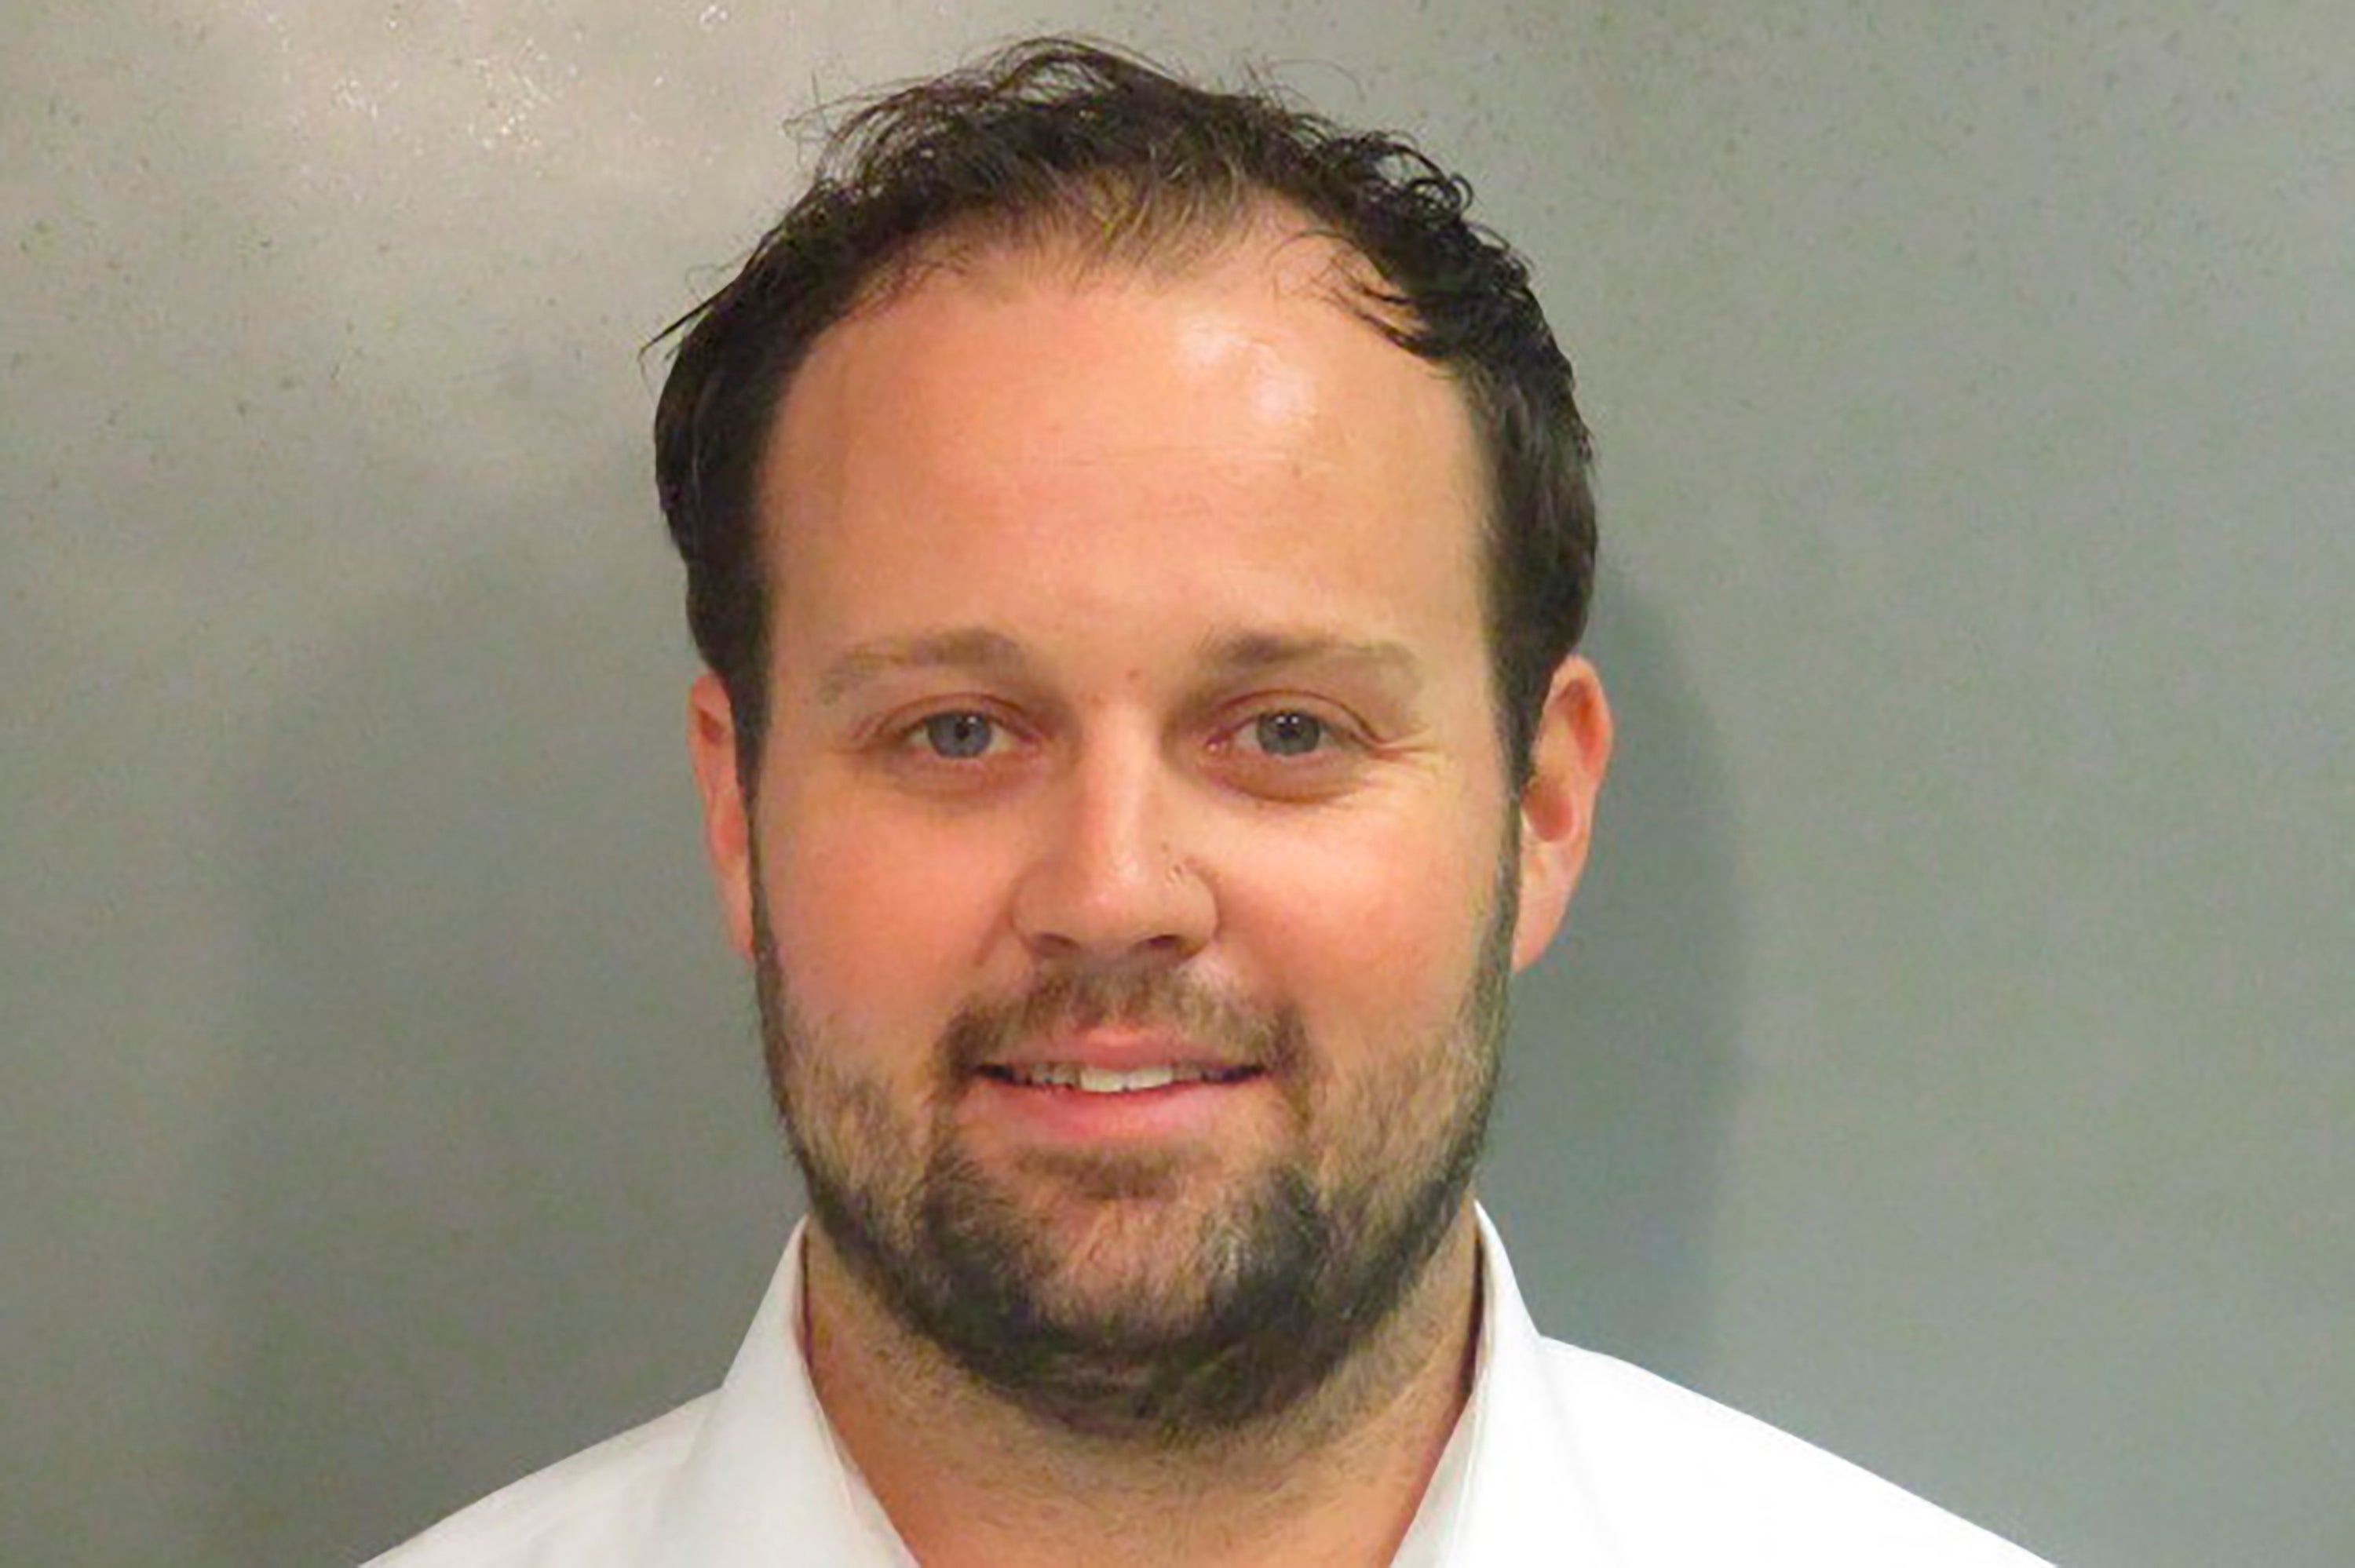 Josh Duggar at the Washington County, Arkansas Detention Center. The US Supreme Court refused to hear Duggar’s appeal asking to have his child pornography conviction overturned